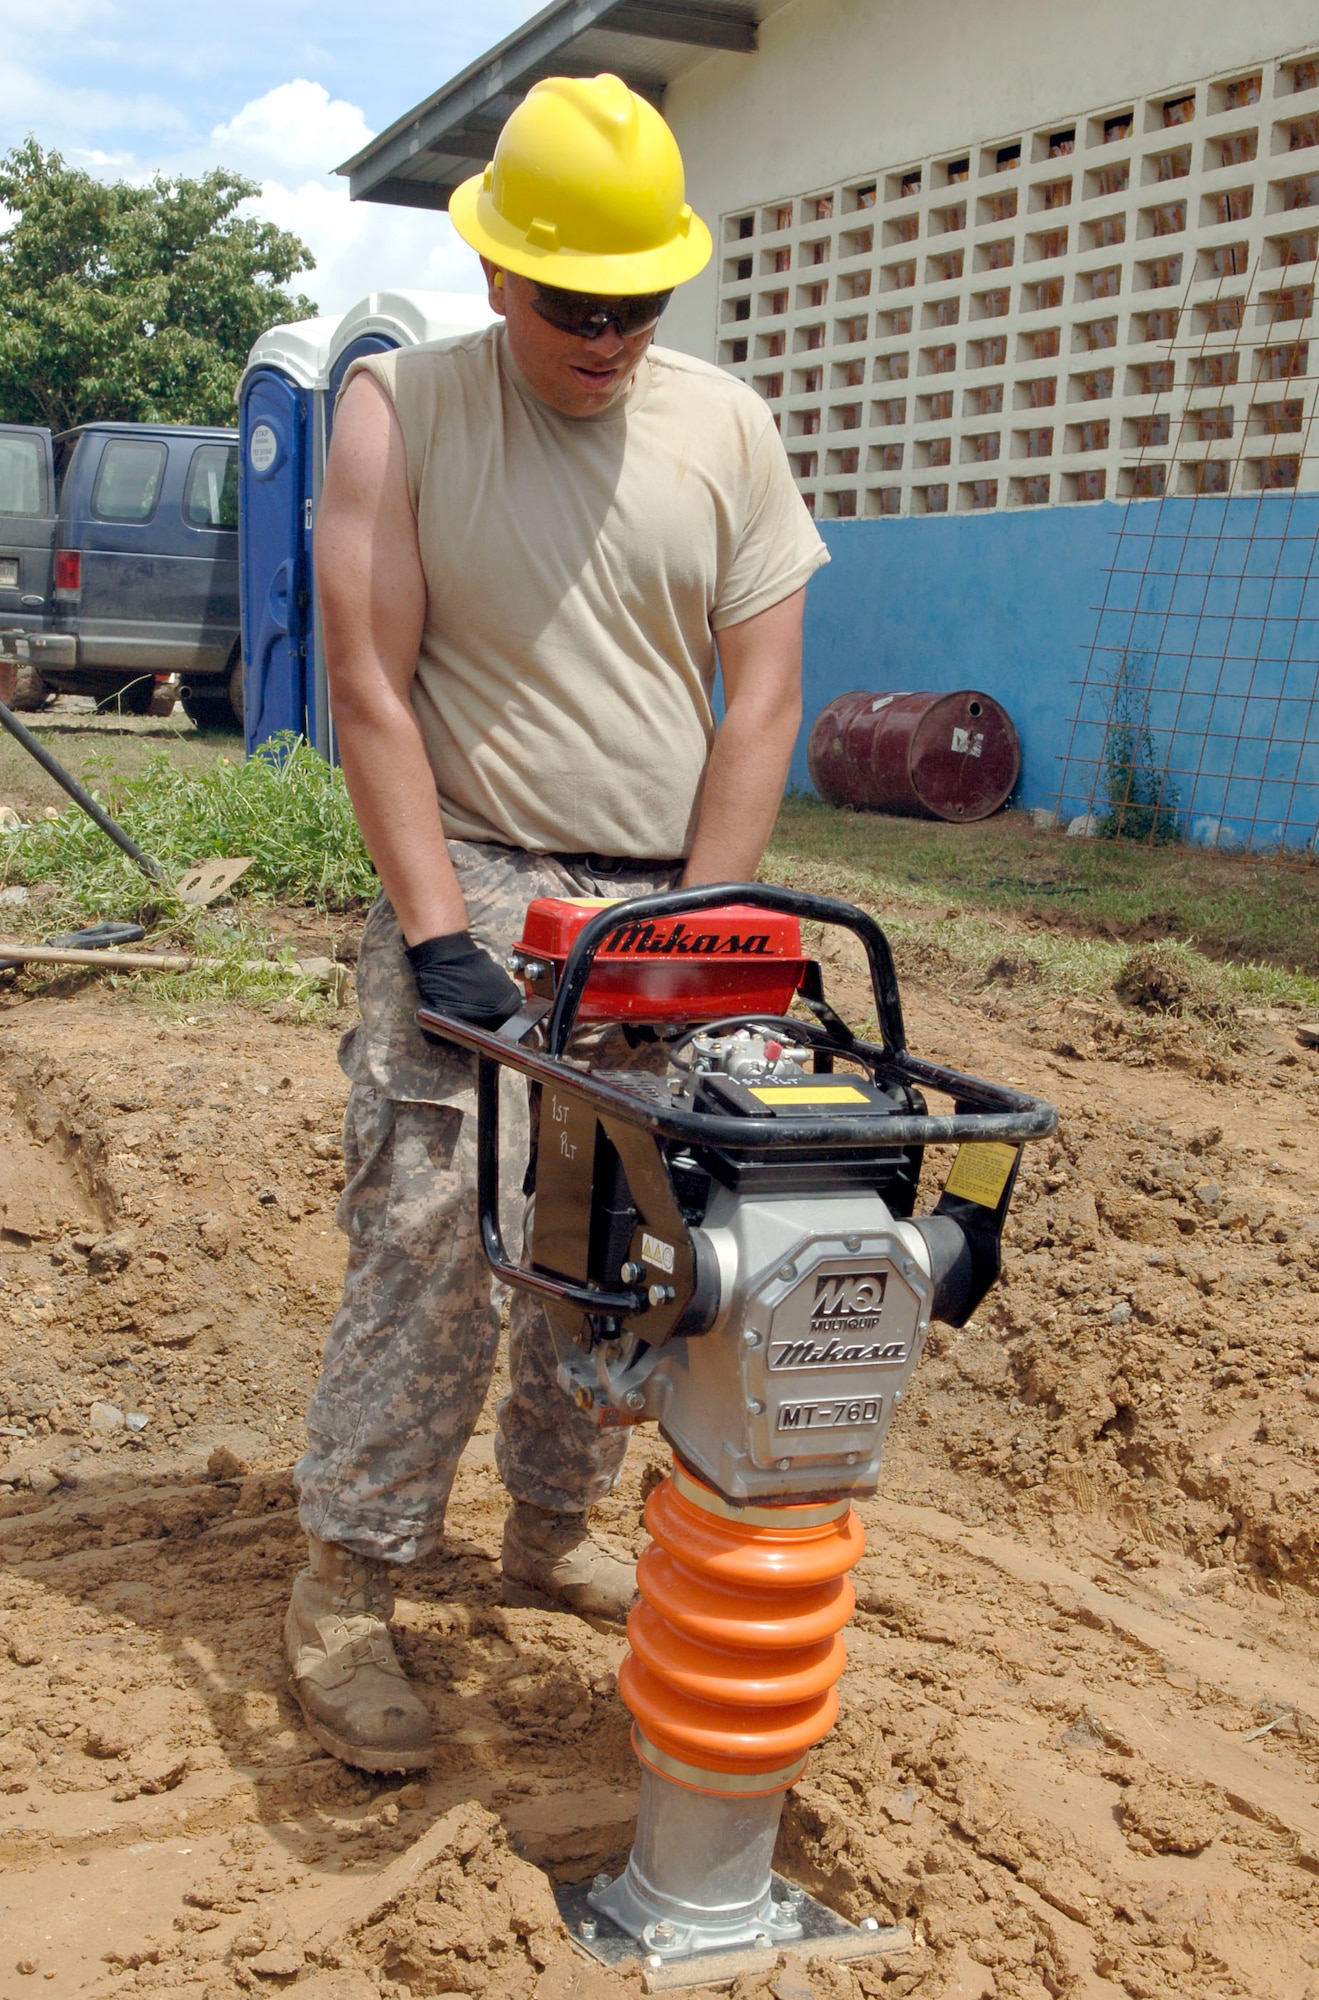 Pvt. Bryan Cornejo, construction engineer with the 372nd Engineer Company, compacts the ground beneath the future site of a new water tower June 26 at Santa Librada elementary school in Panama. The Army Reservists are deployed in support of New Horizons Panama 2010, a humanitarian assistance mission designed to strengthen partnerships between the United States and Panama. (U.S. Air Force photo/Tech. Sgt. Eric Petosky)